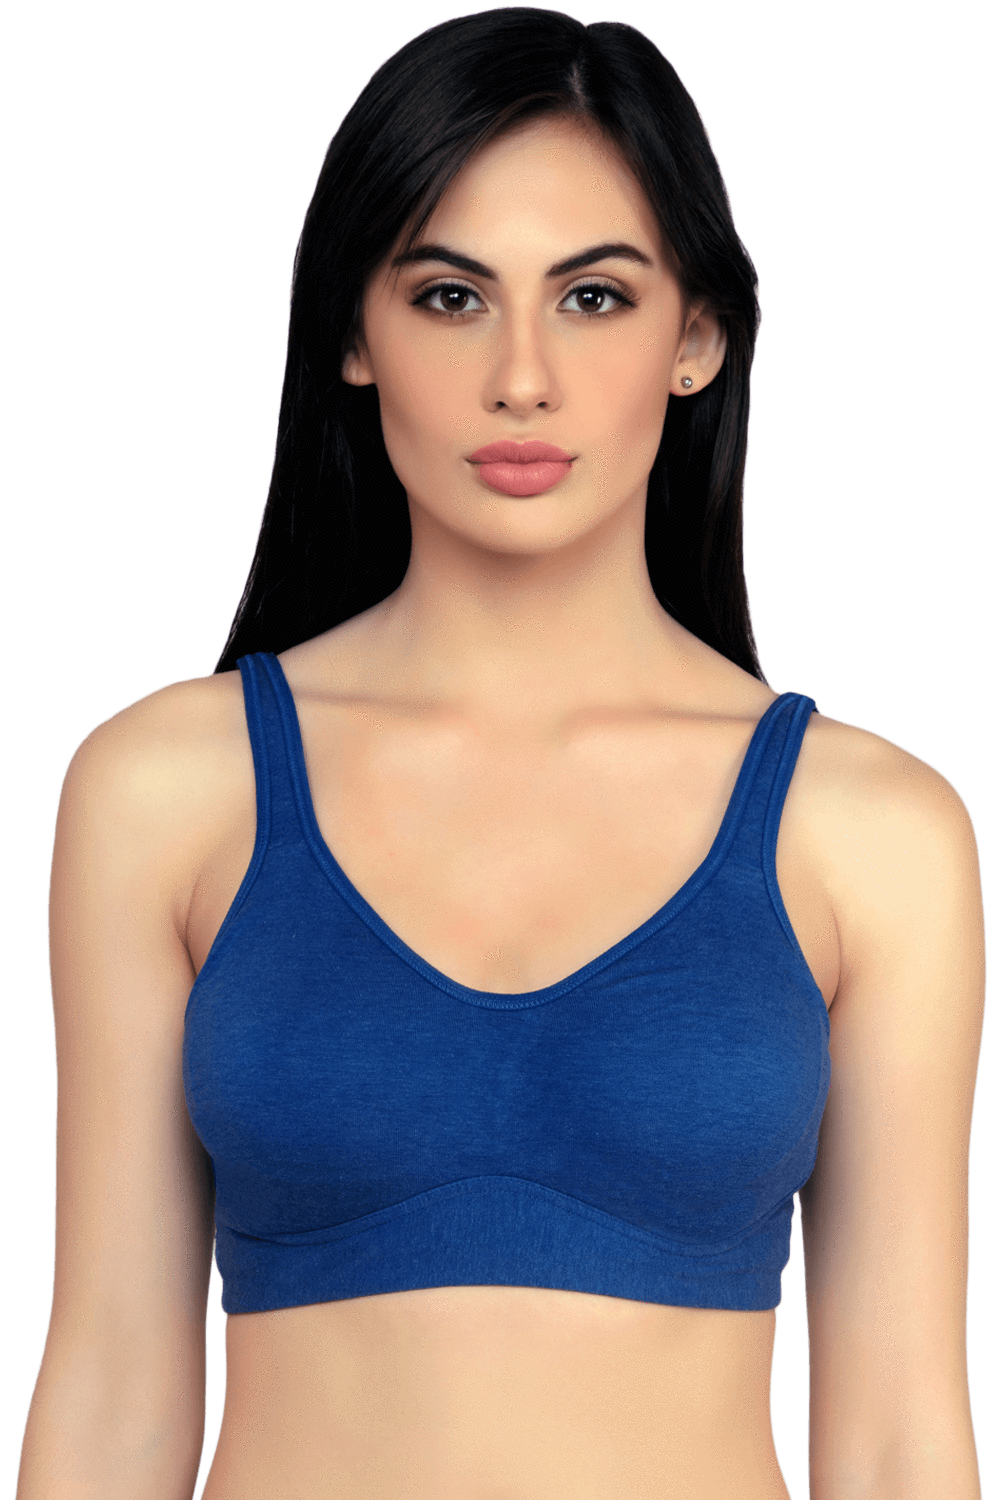 Inner Sense Organic Antimicrobial Soft Cup Full Coverage Bra ISB098 Bras, Cotton, featured, full coverage, organic - bare essentials